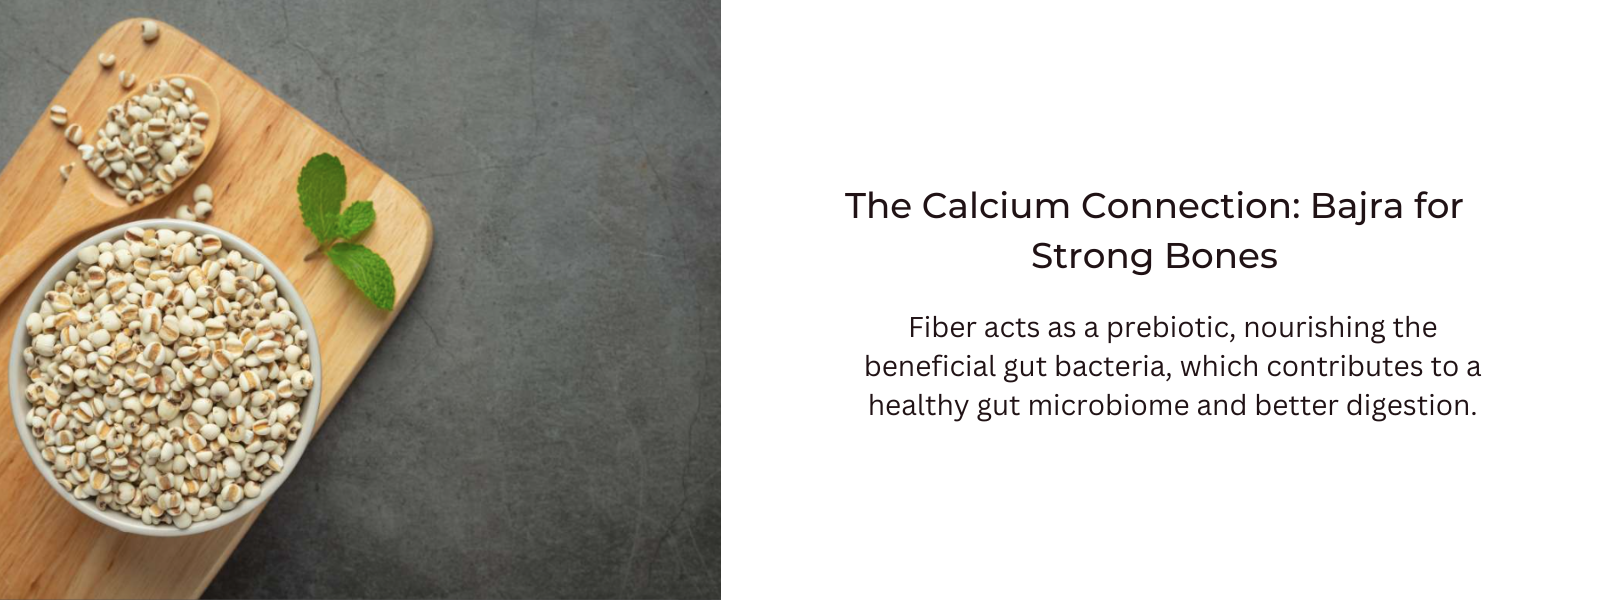 The Calcium Connection: Bajra for Strong Bones